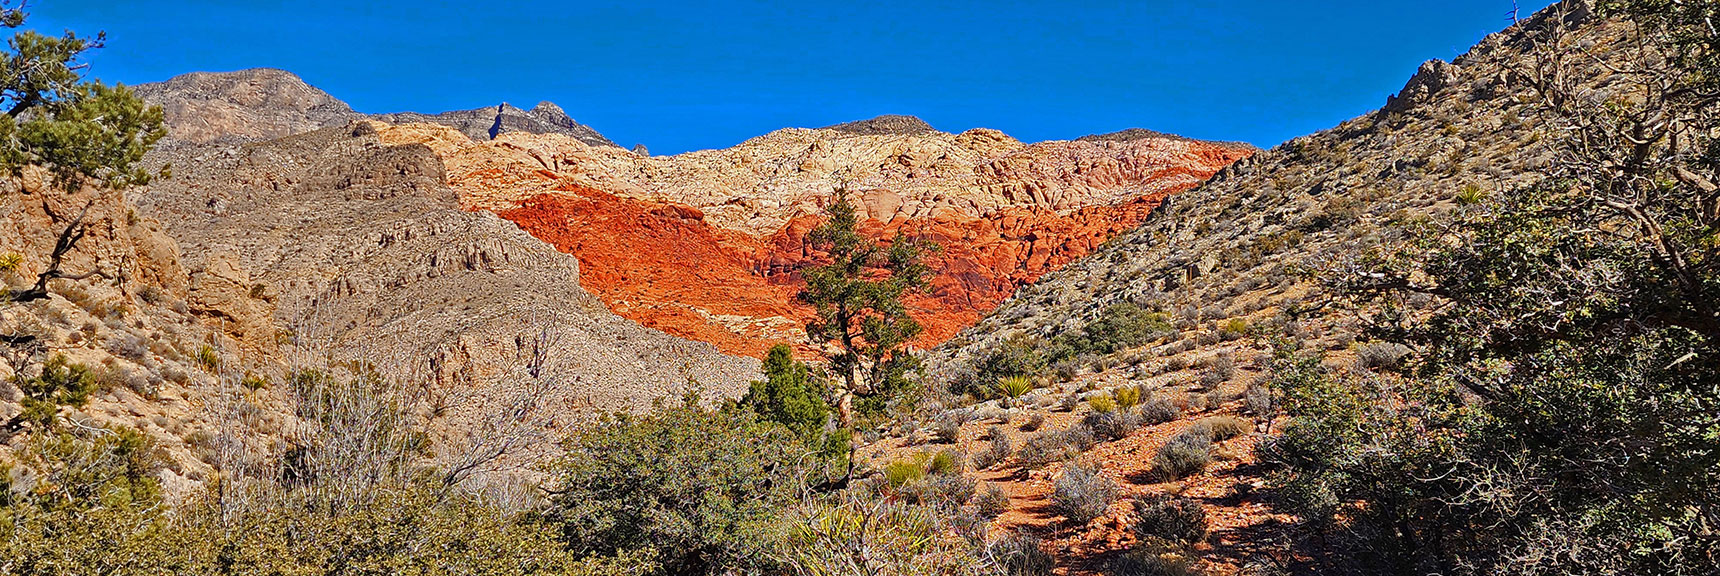 Looking Down the Rattlesnake Trail Toward Gateway Canyon, Kraft Mt. Loop Area | Upper Calico Hills Loop | Calico Basin and Red Rock Canyon, Nevada